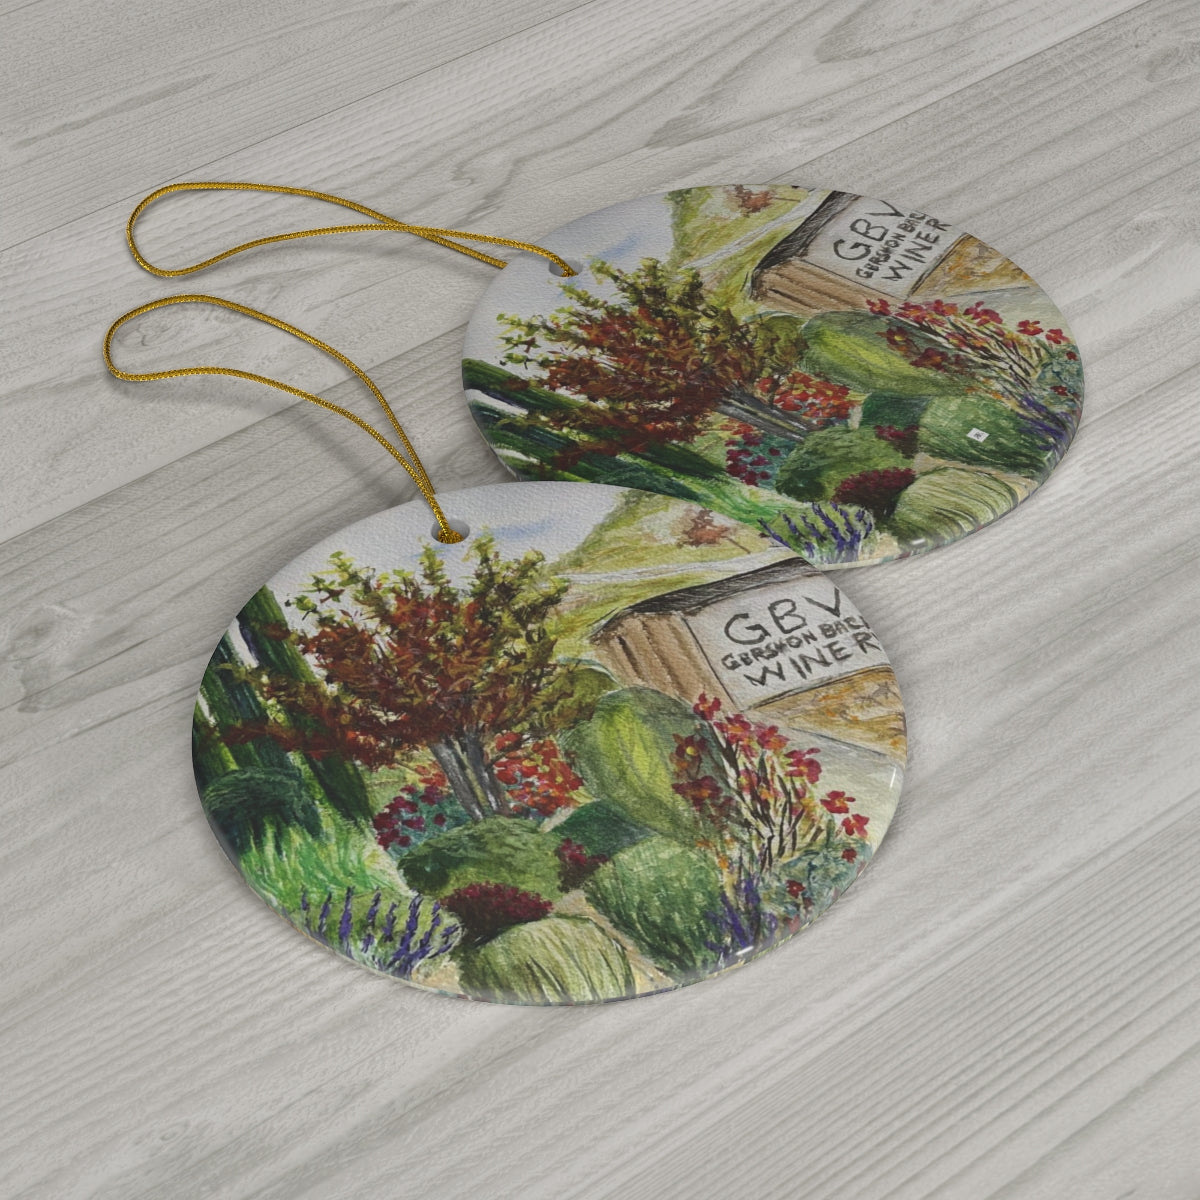 Barrel Room and Garden at GBV Winery Ceramic Ornament